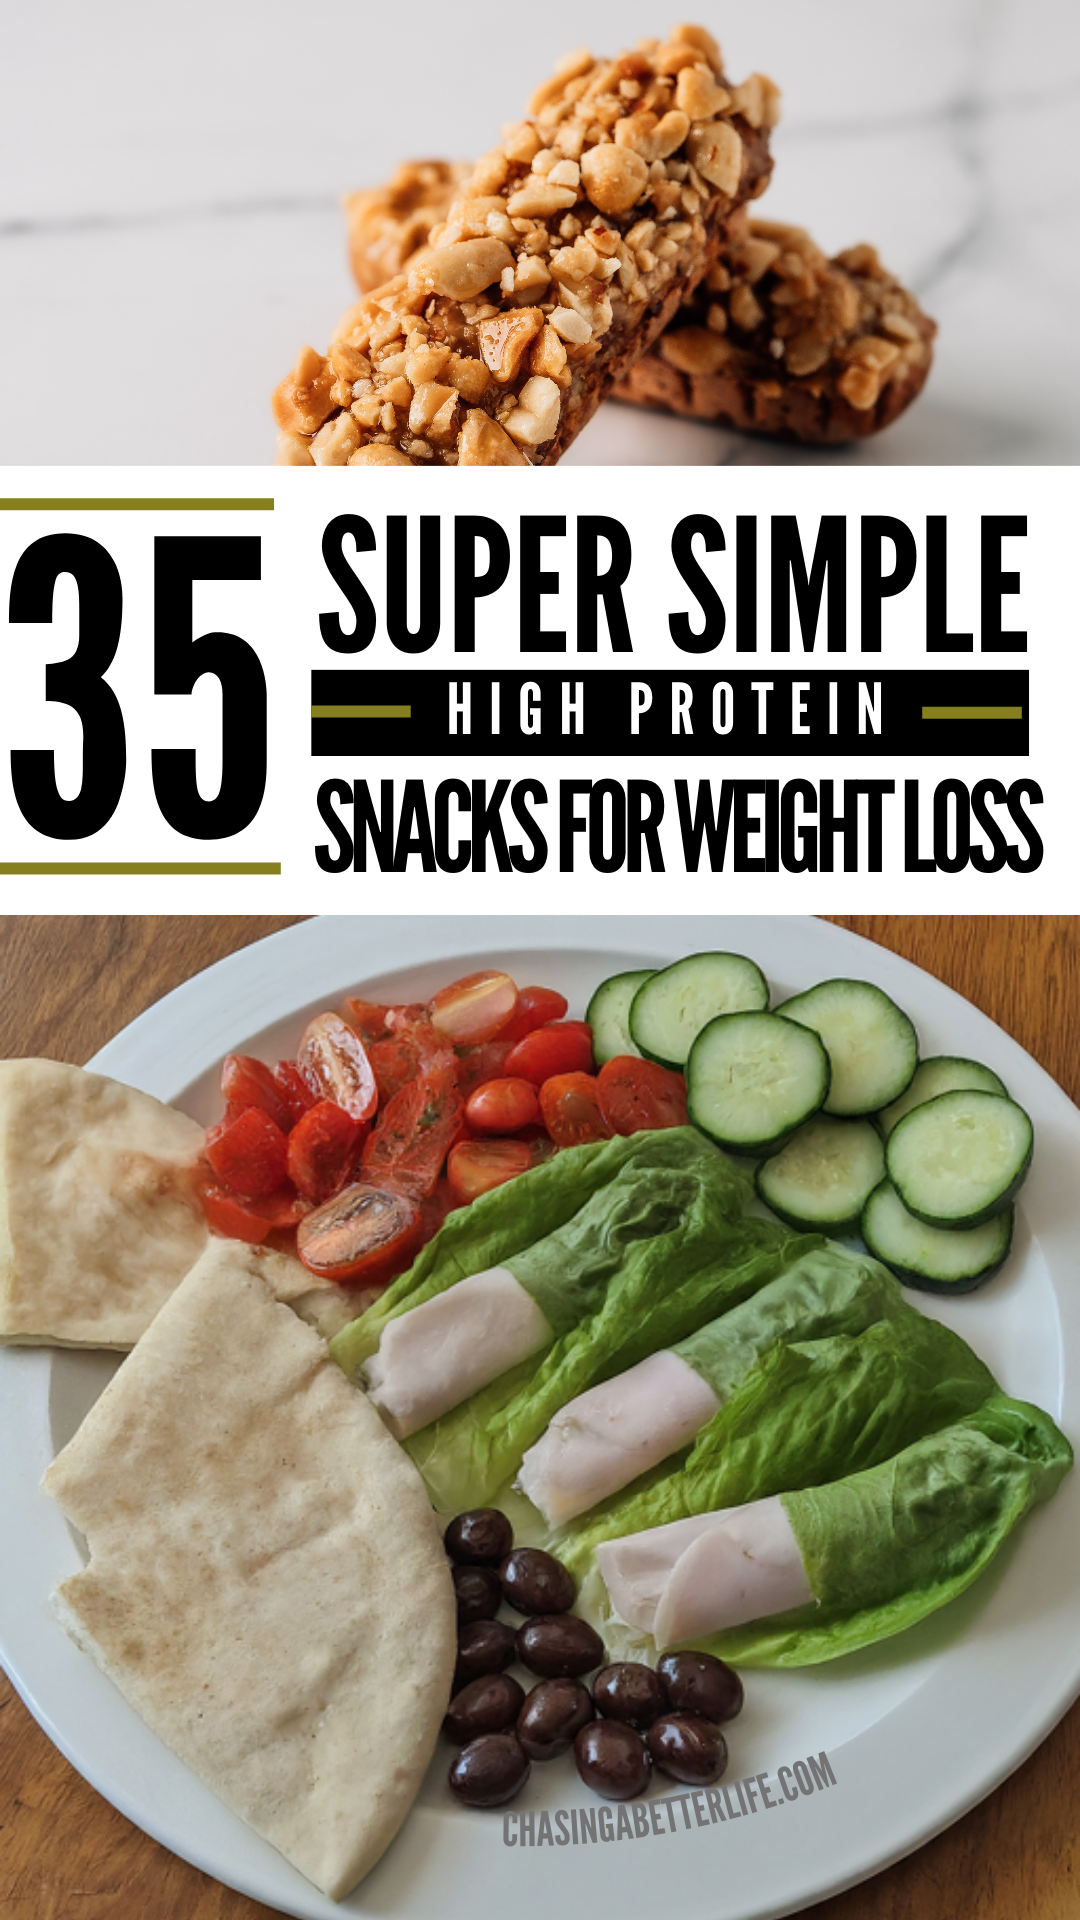 Snack Your Way Slim! 35 Easy High-Protein Snack Recipes for Delicious Weight Loss 2